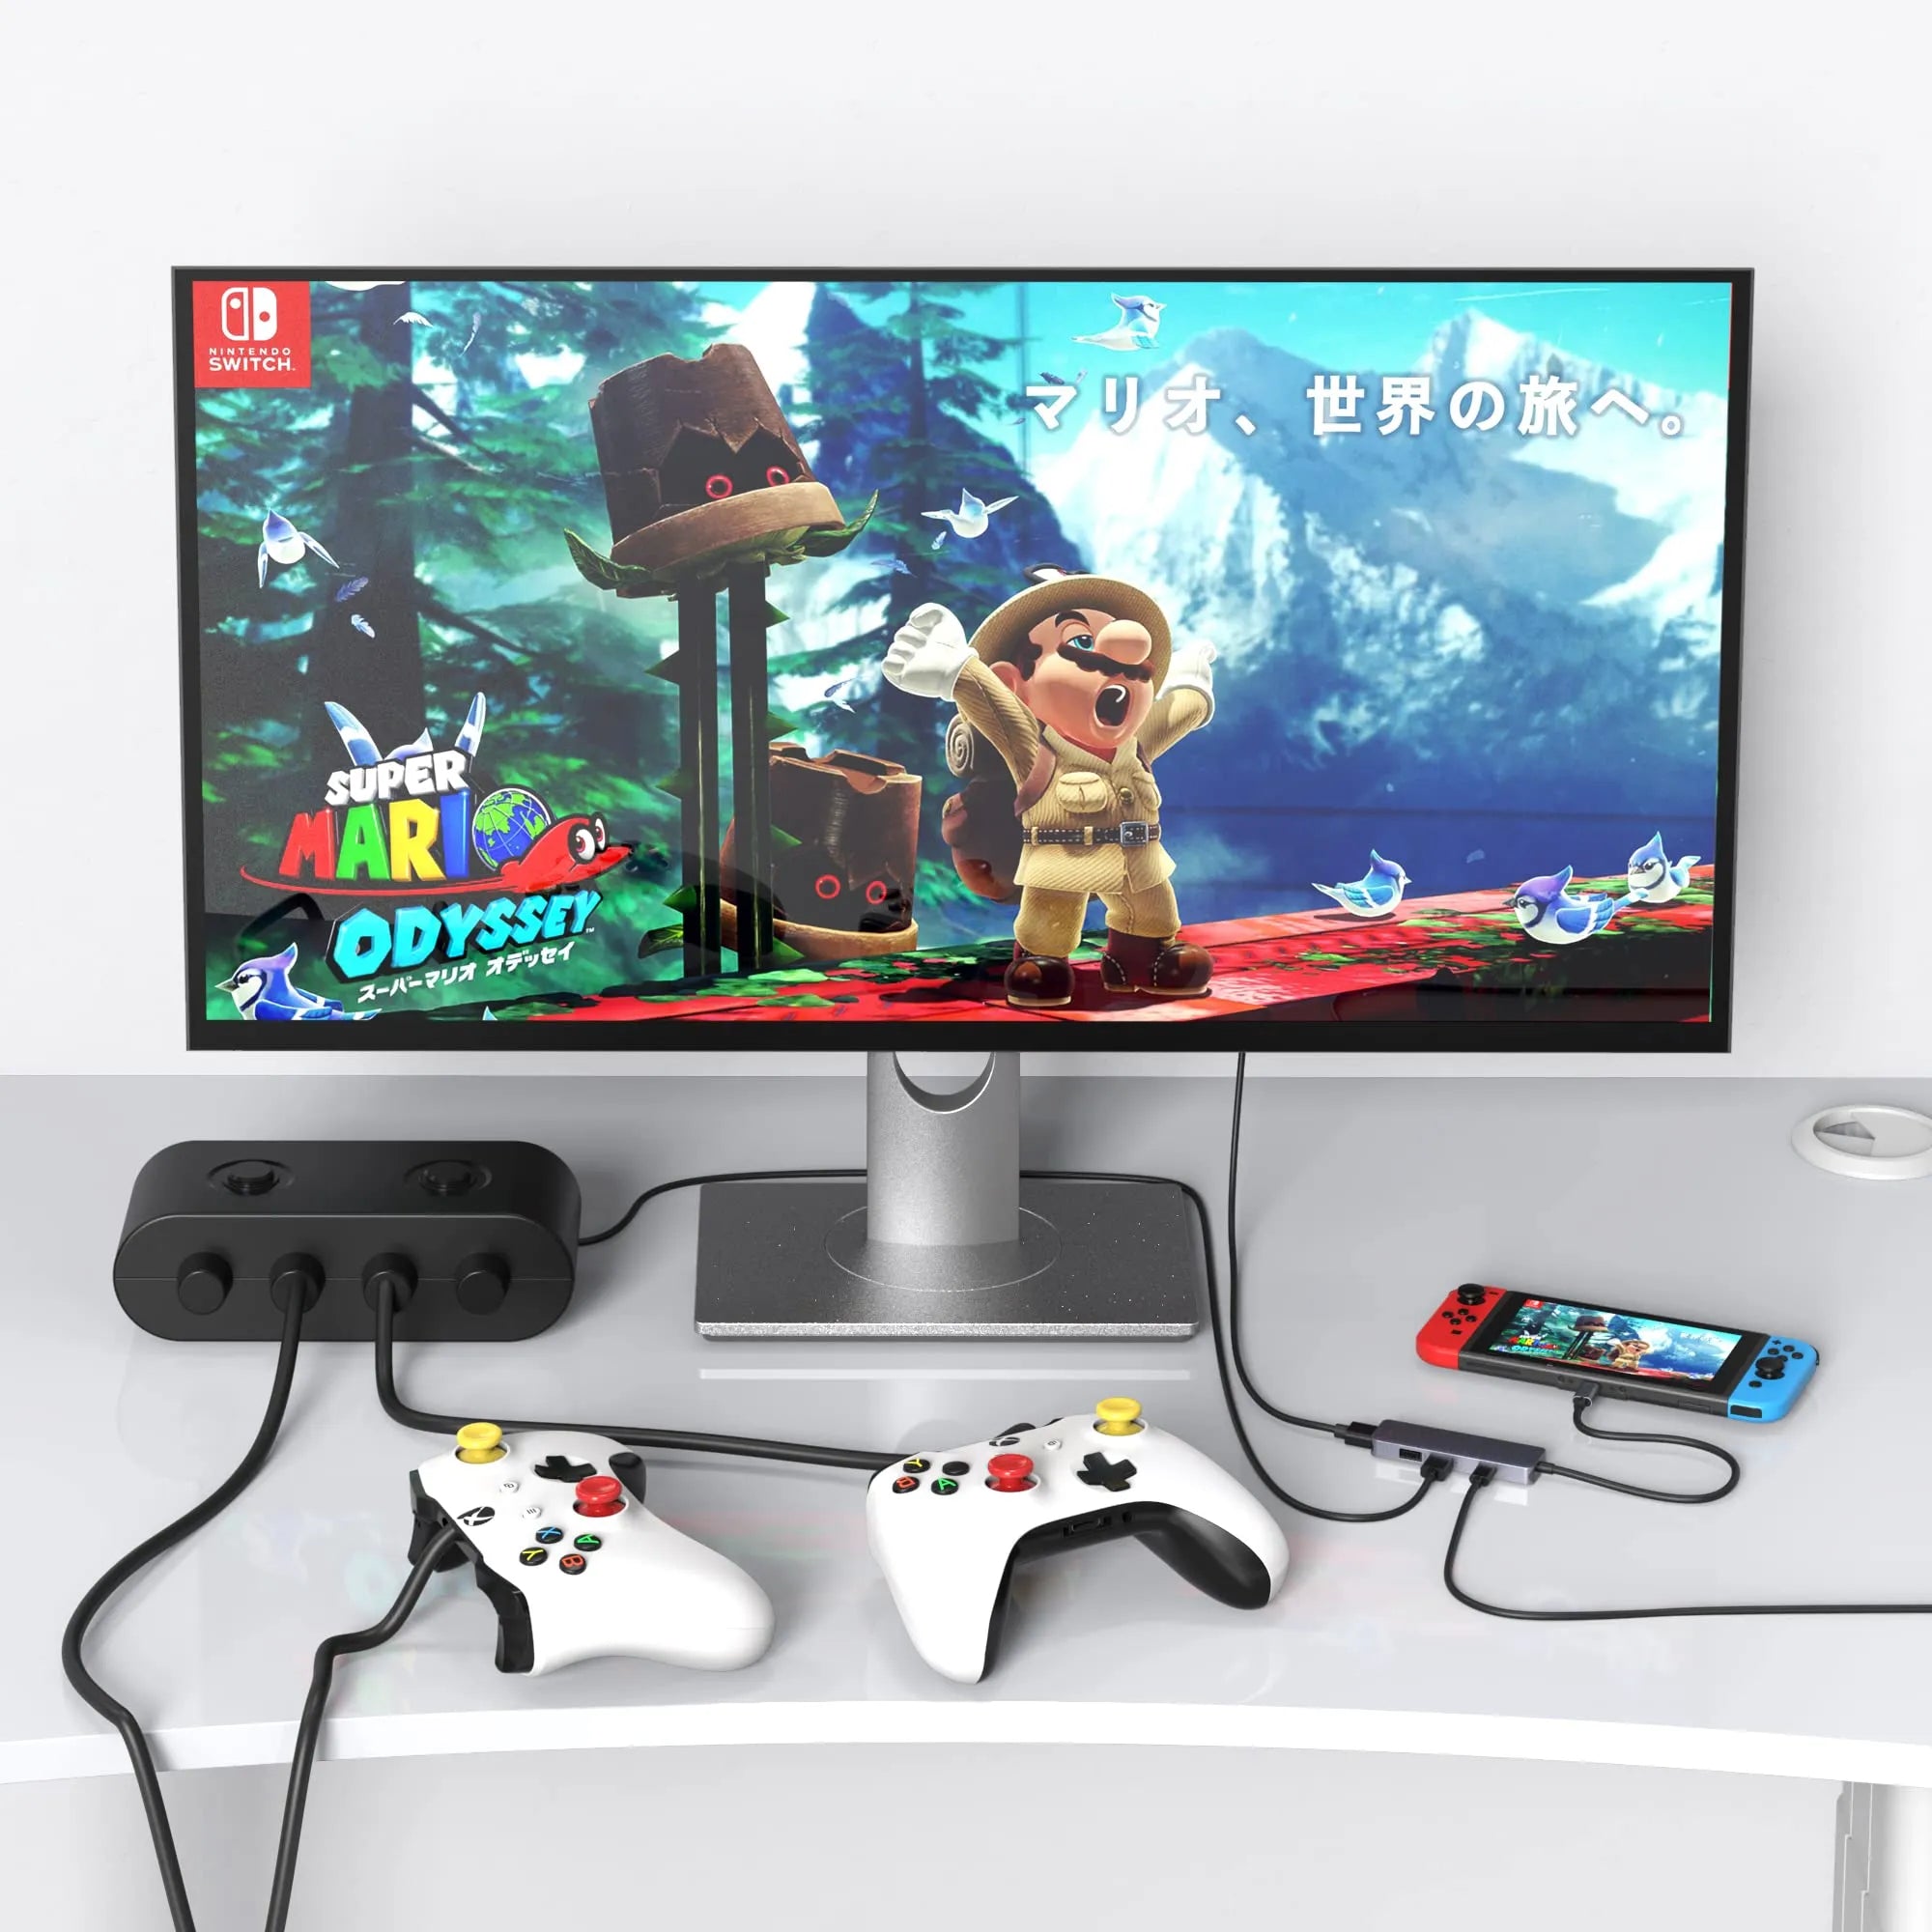 USB C to HDMI-compatible Adapter, 3.0 Port 3-in-1 Multiport AV Converter  Hub Cable for Switch Game/Samsung DEX mode on the TV 